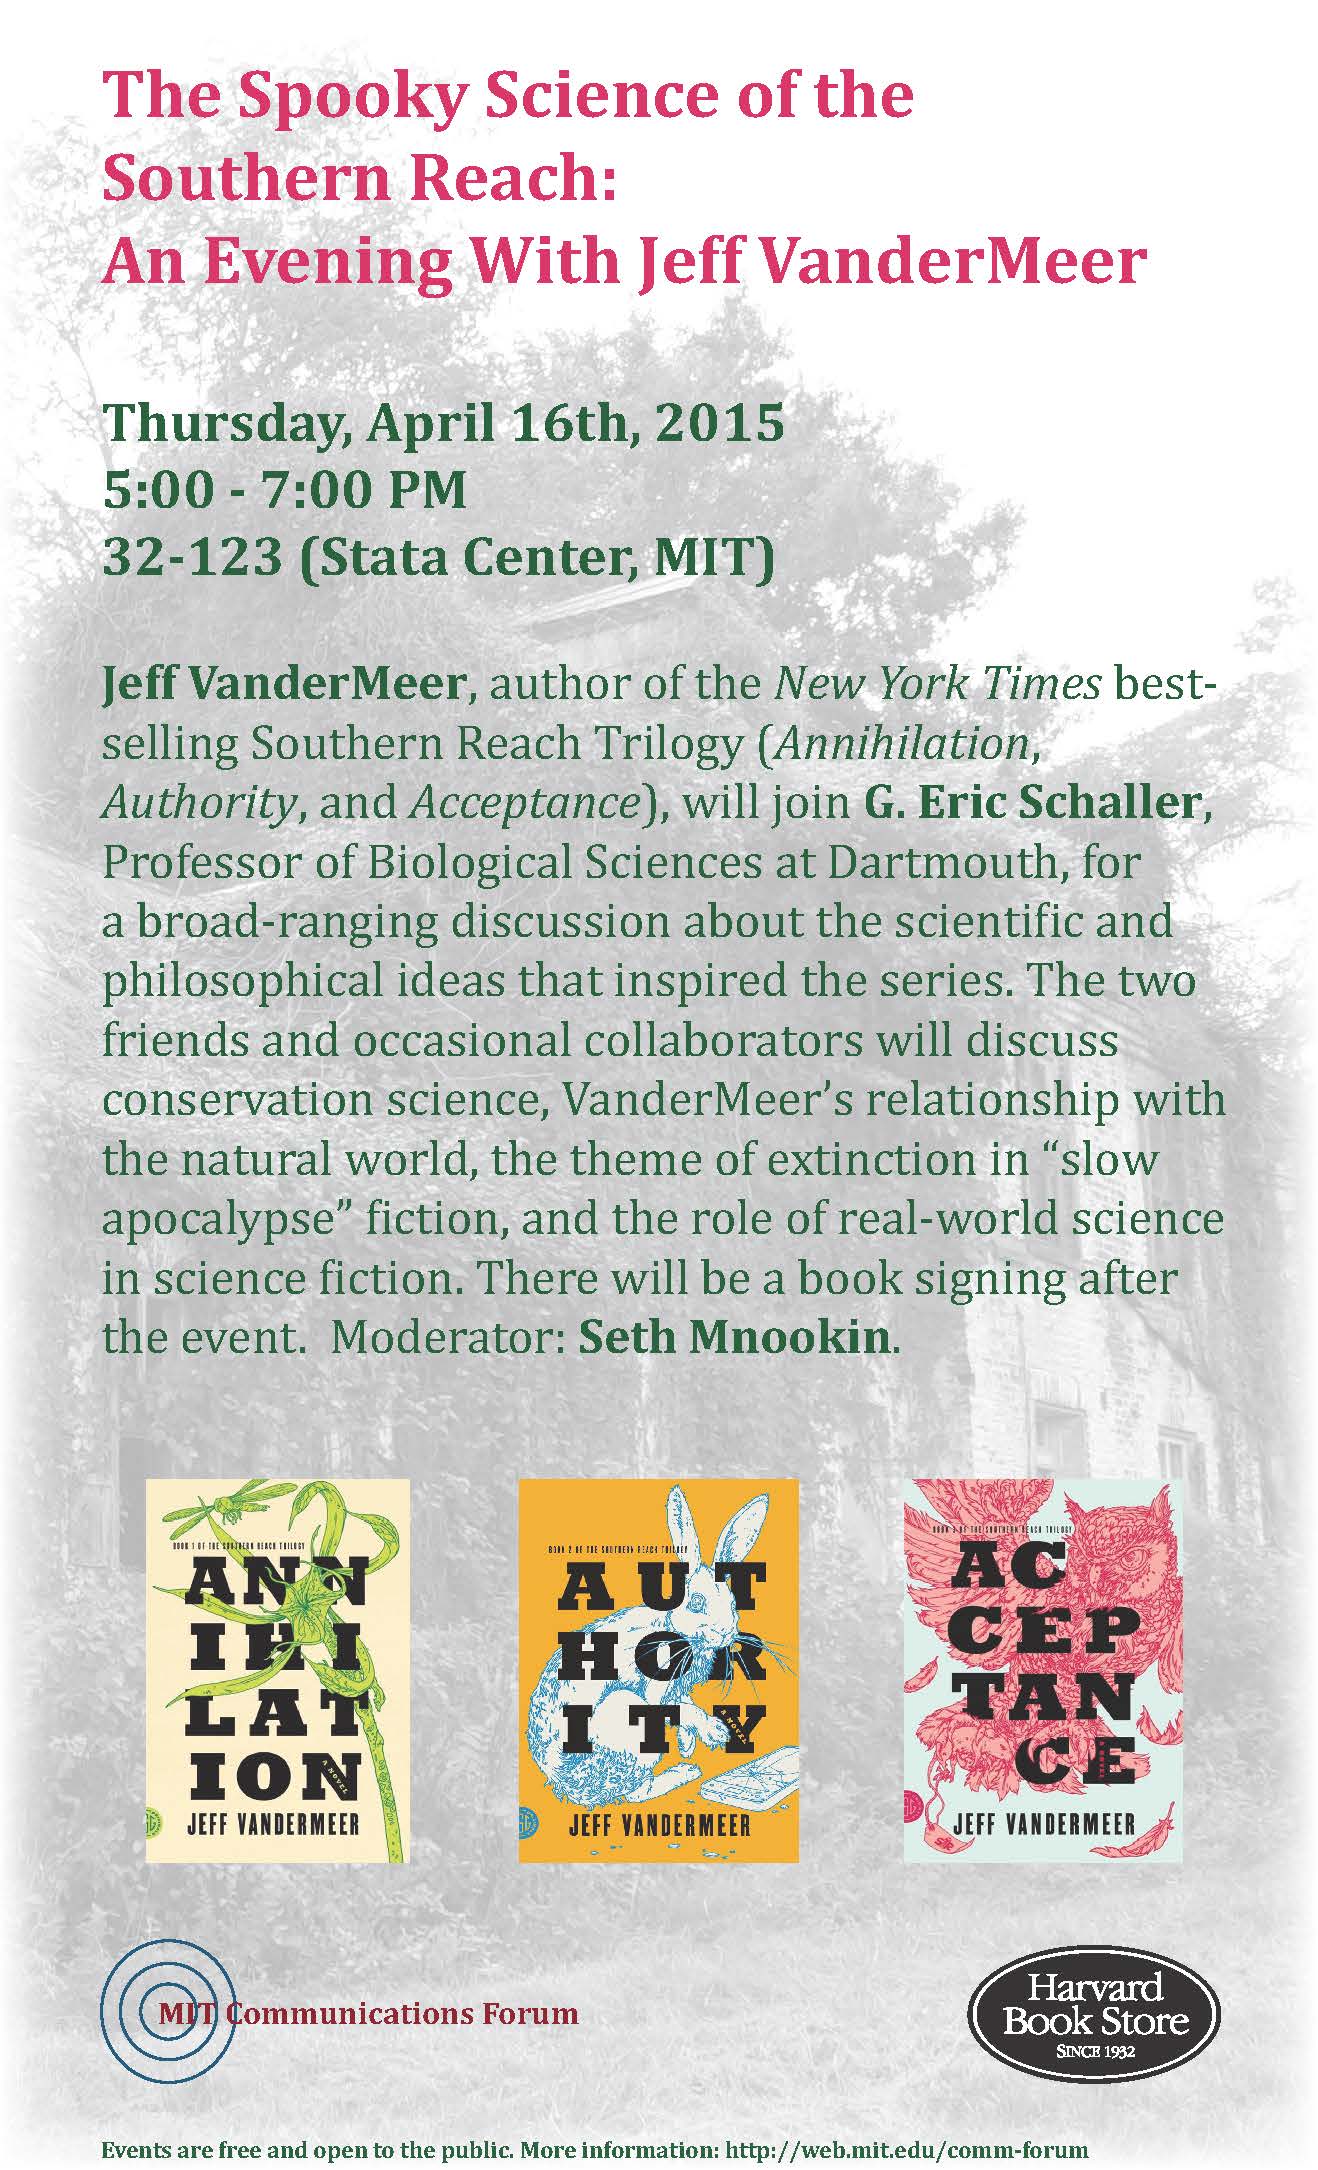 Communications Forum: The Spooky Science of the Southern Reach: An Evening With Jeff VanderMeer on Apr 16, 5pm